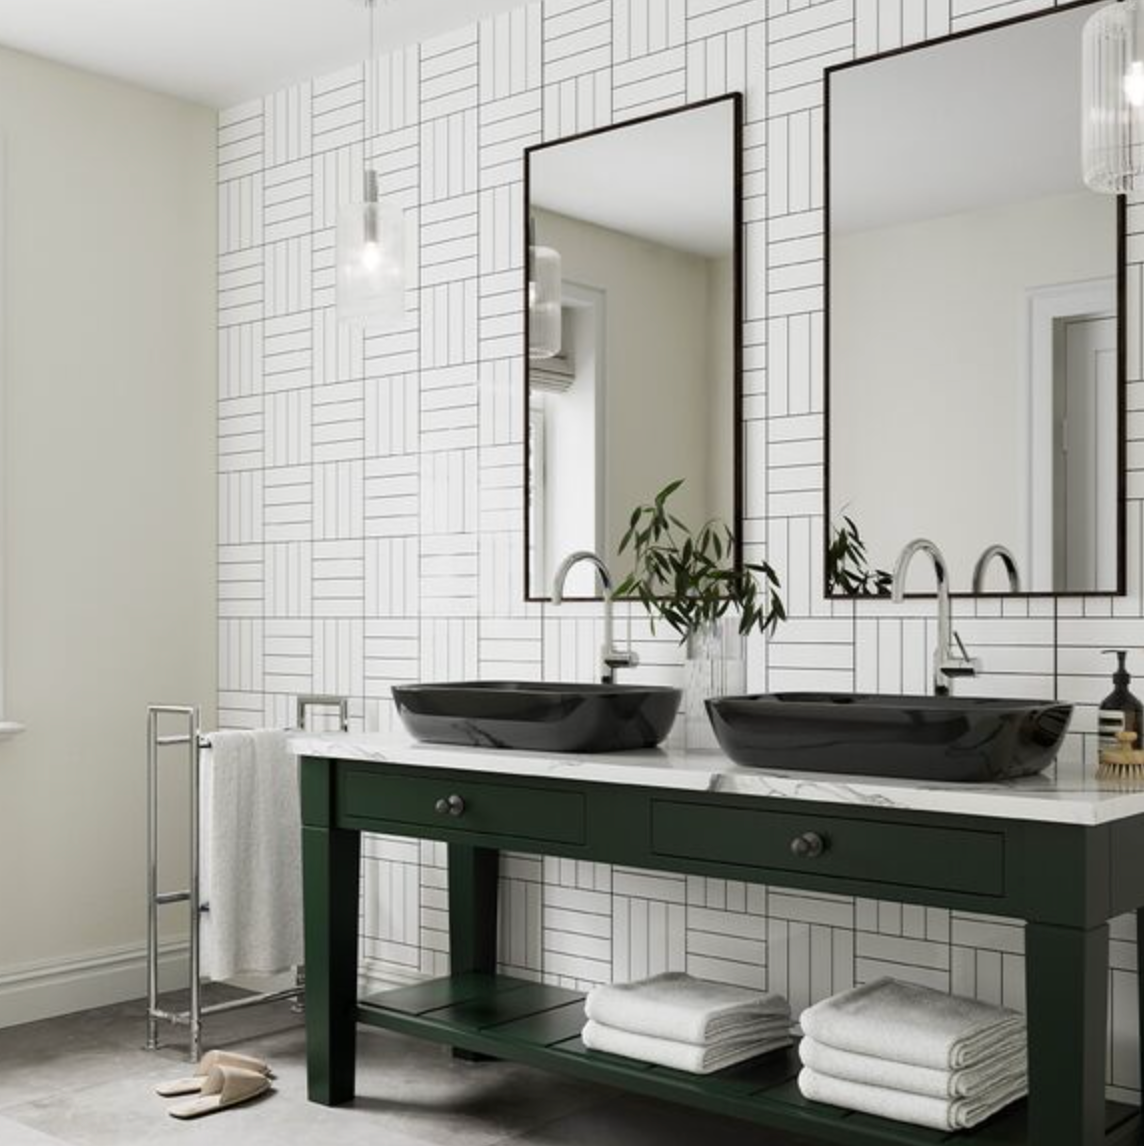 Showerwall Acrylic Patterns & Tiles Collection  - Square Parquet White